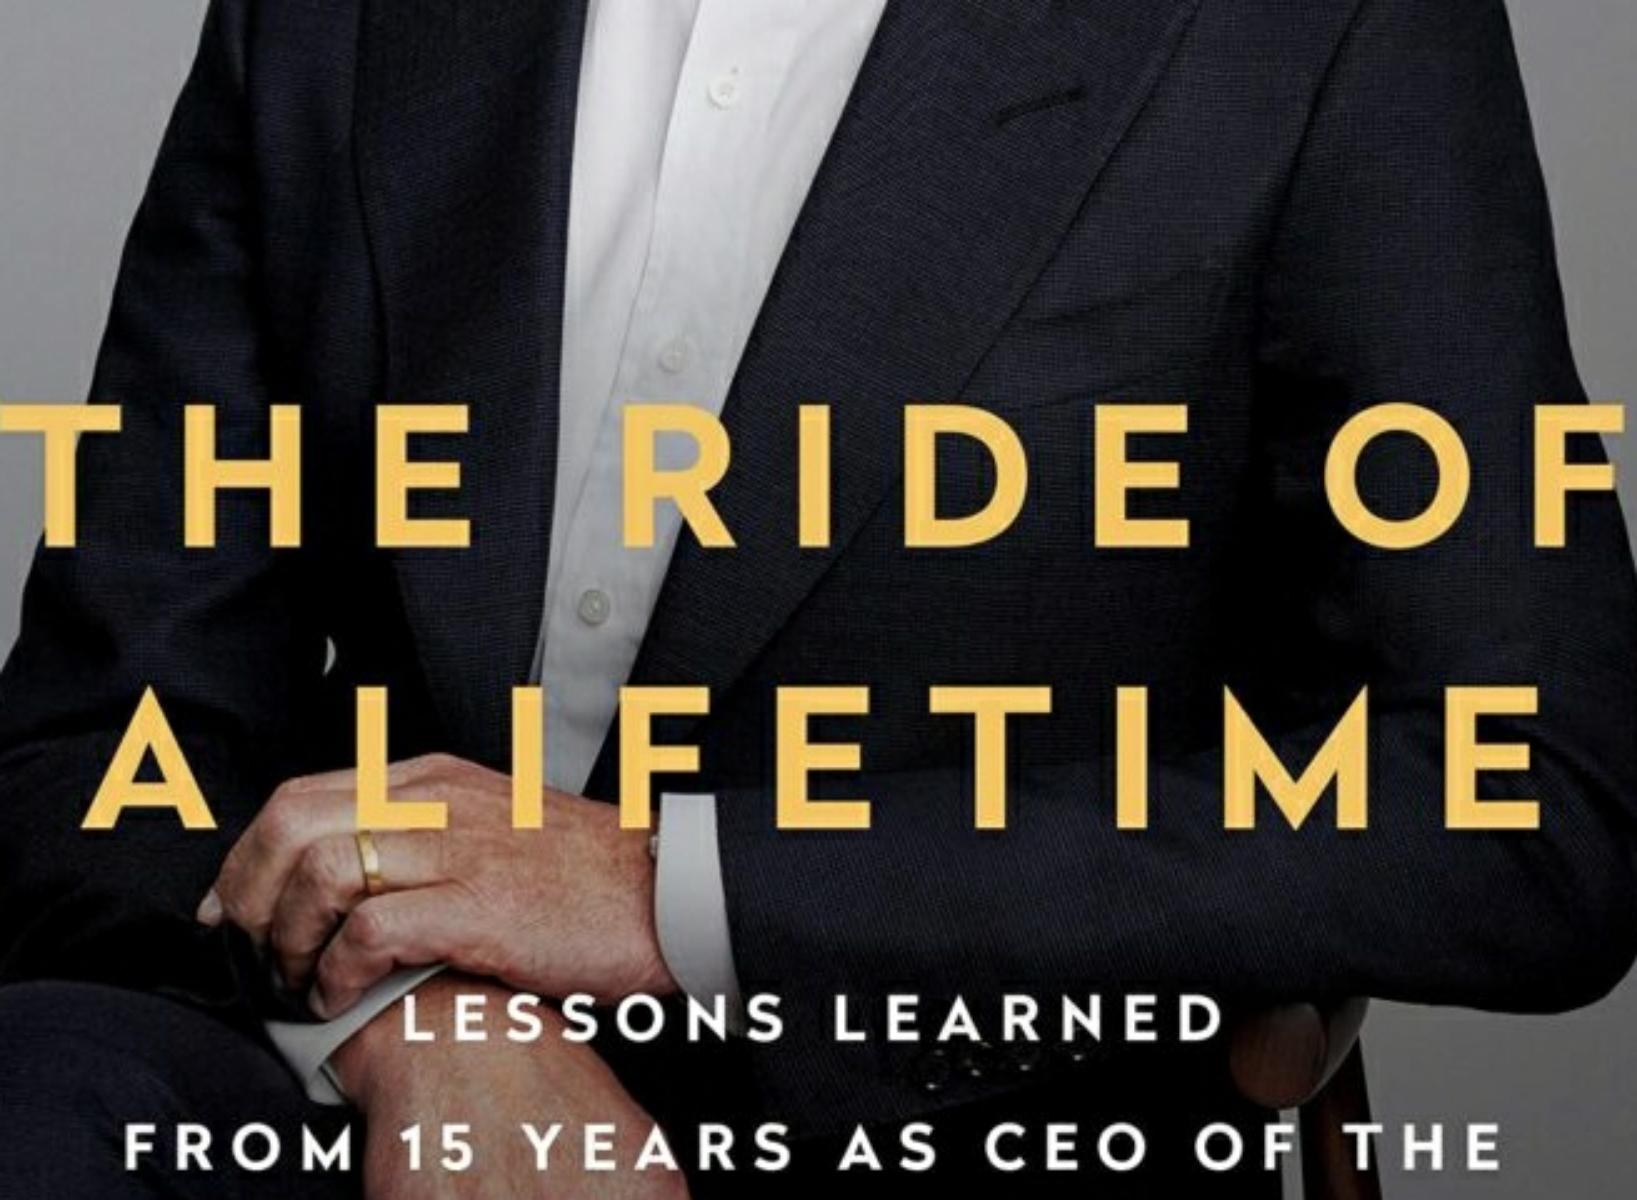 The Ride of a Lifetime: Lessons Learned from CEO of Disney